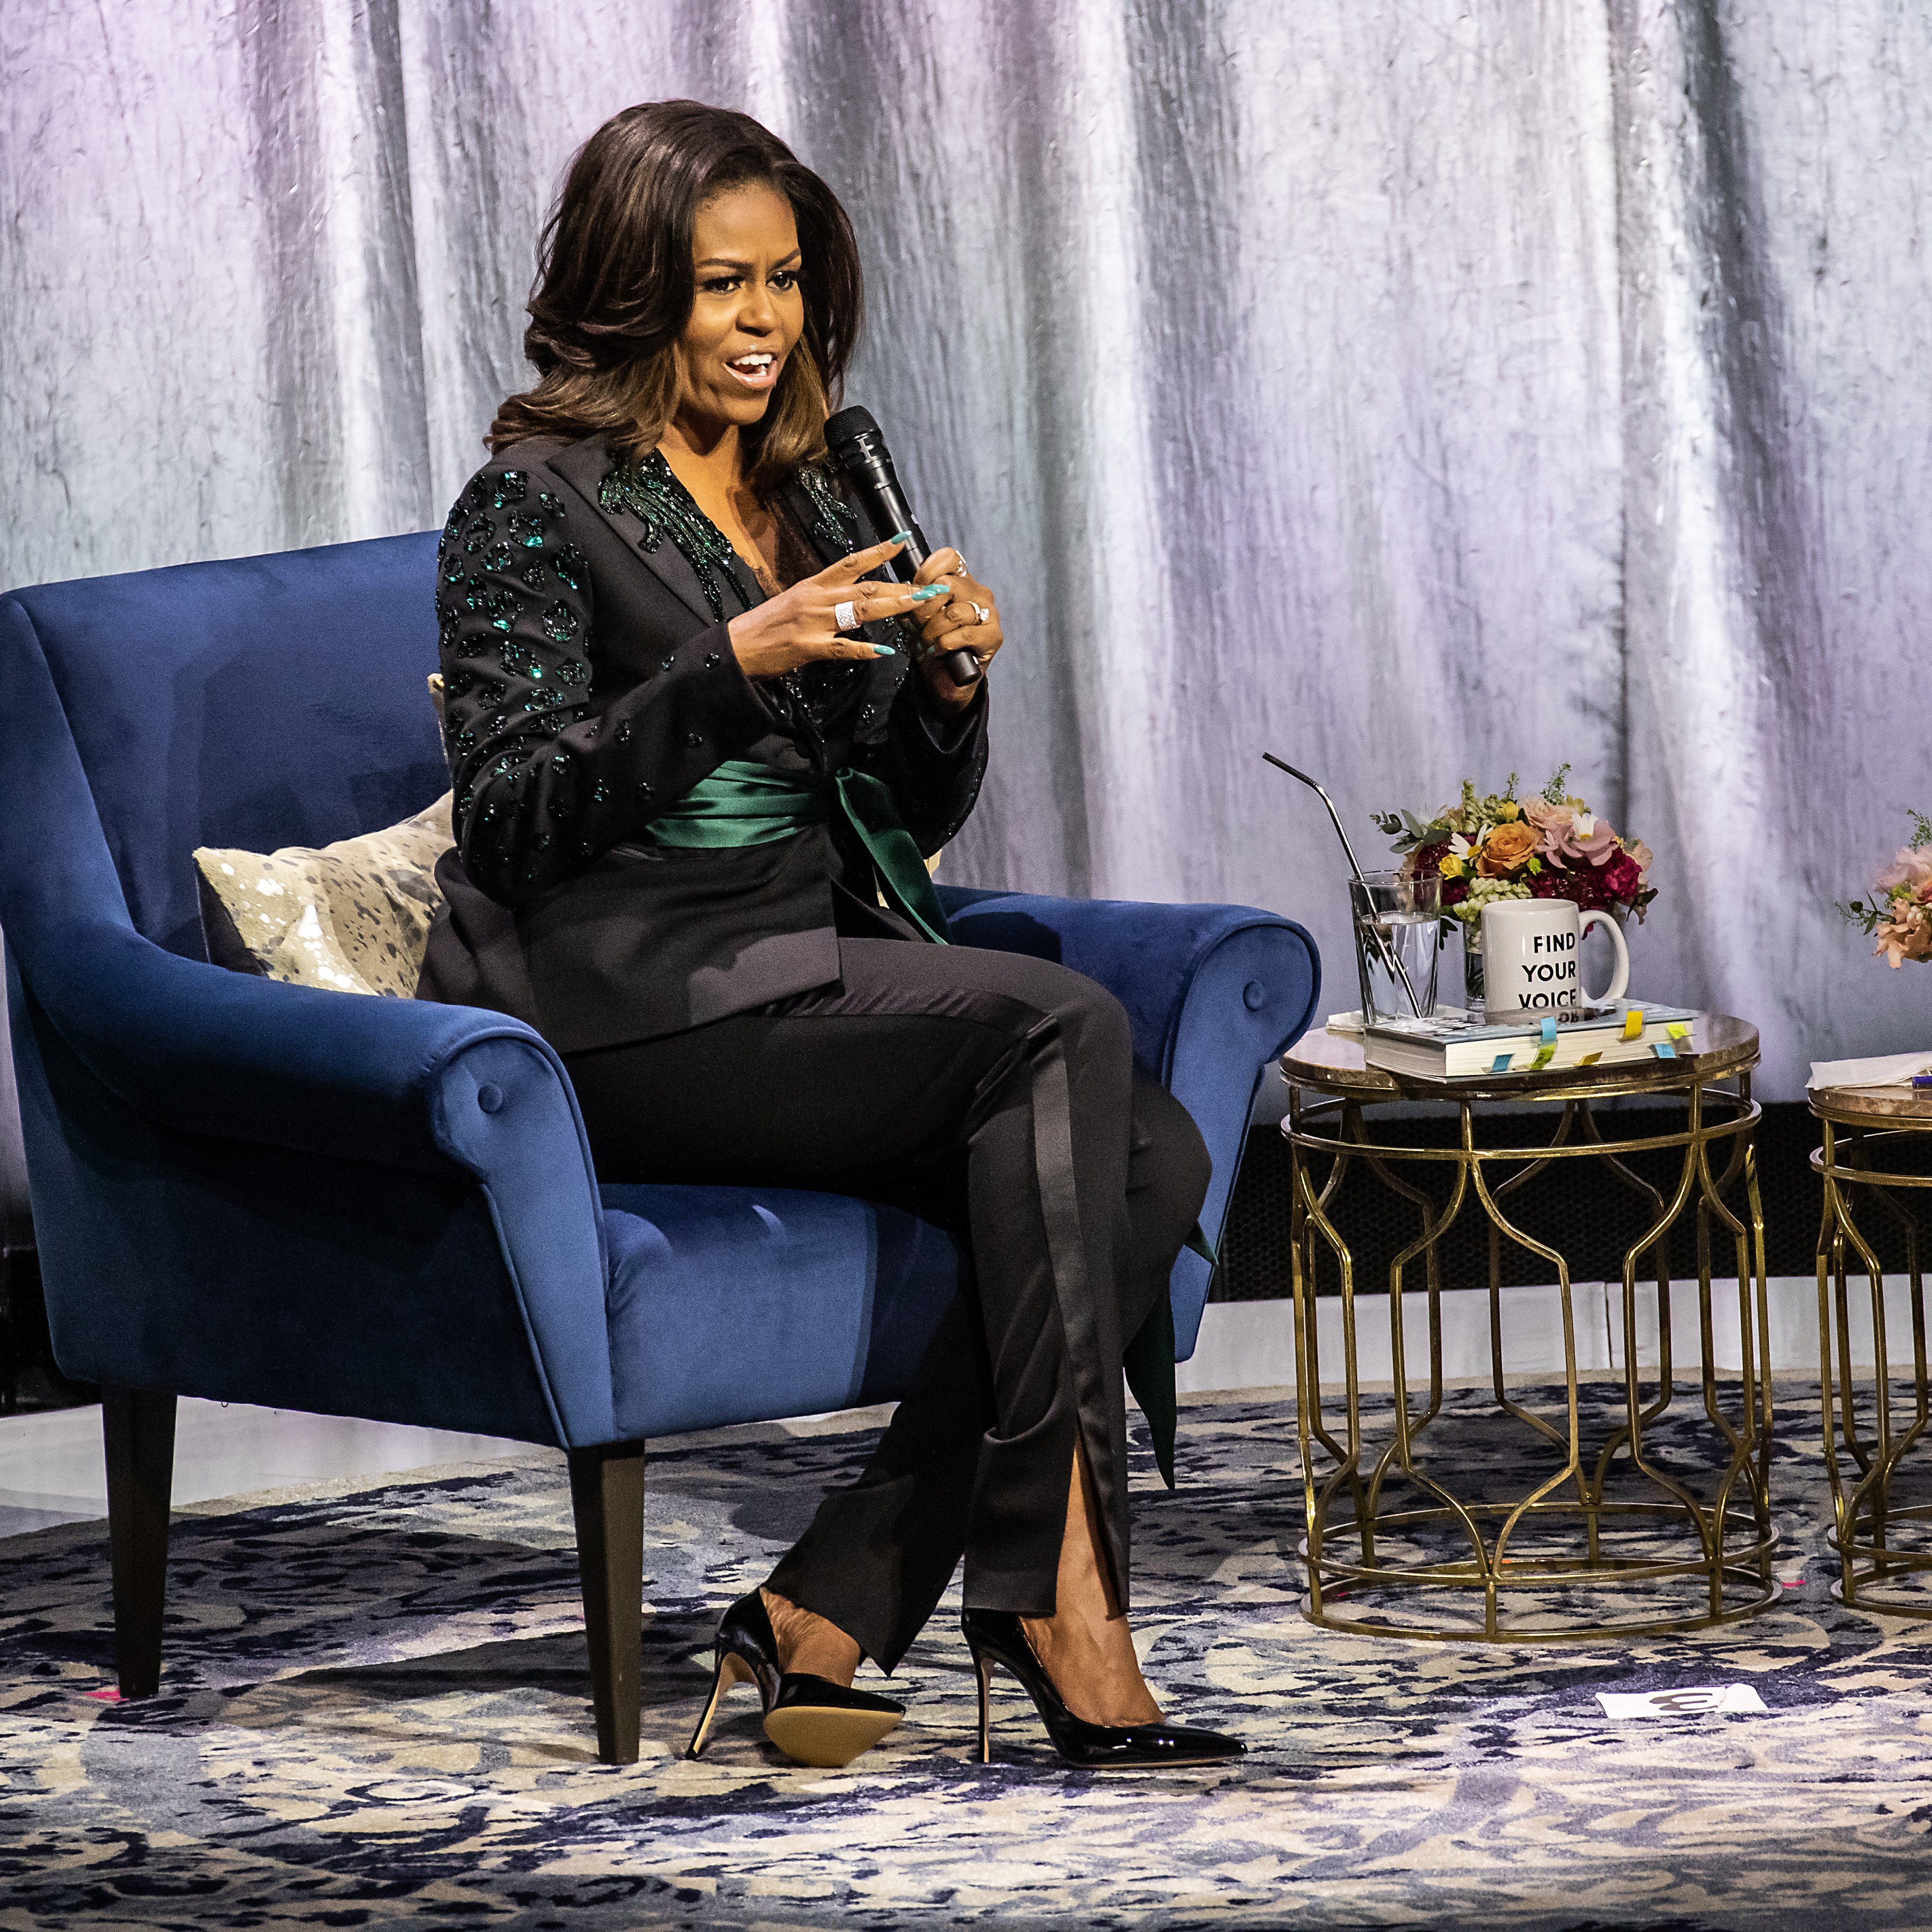 Michelle Obama held a conversation with Phoebe Robinson about her book 'Becoming' at Oslo Spektrum on April 11, 2019 in Oslo, Norway | Photo: Getty Images